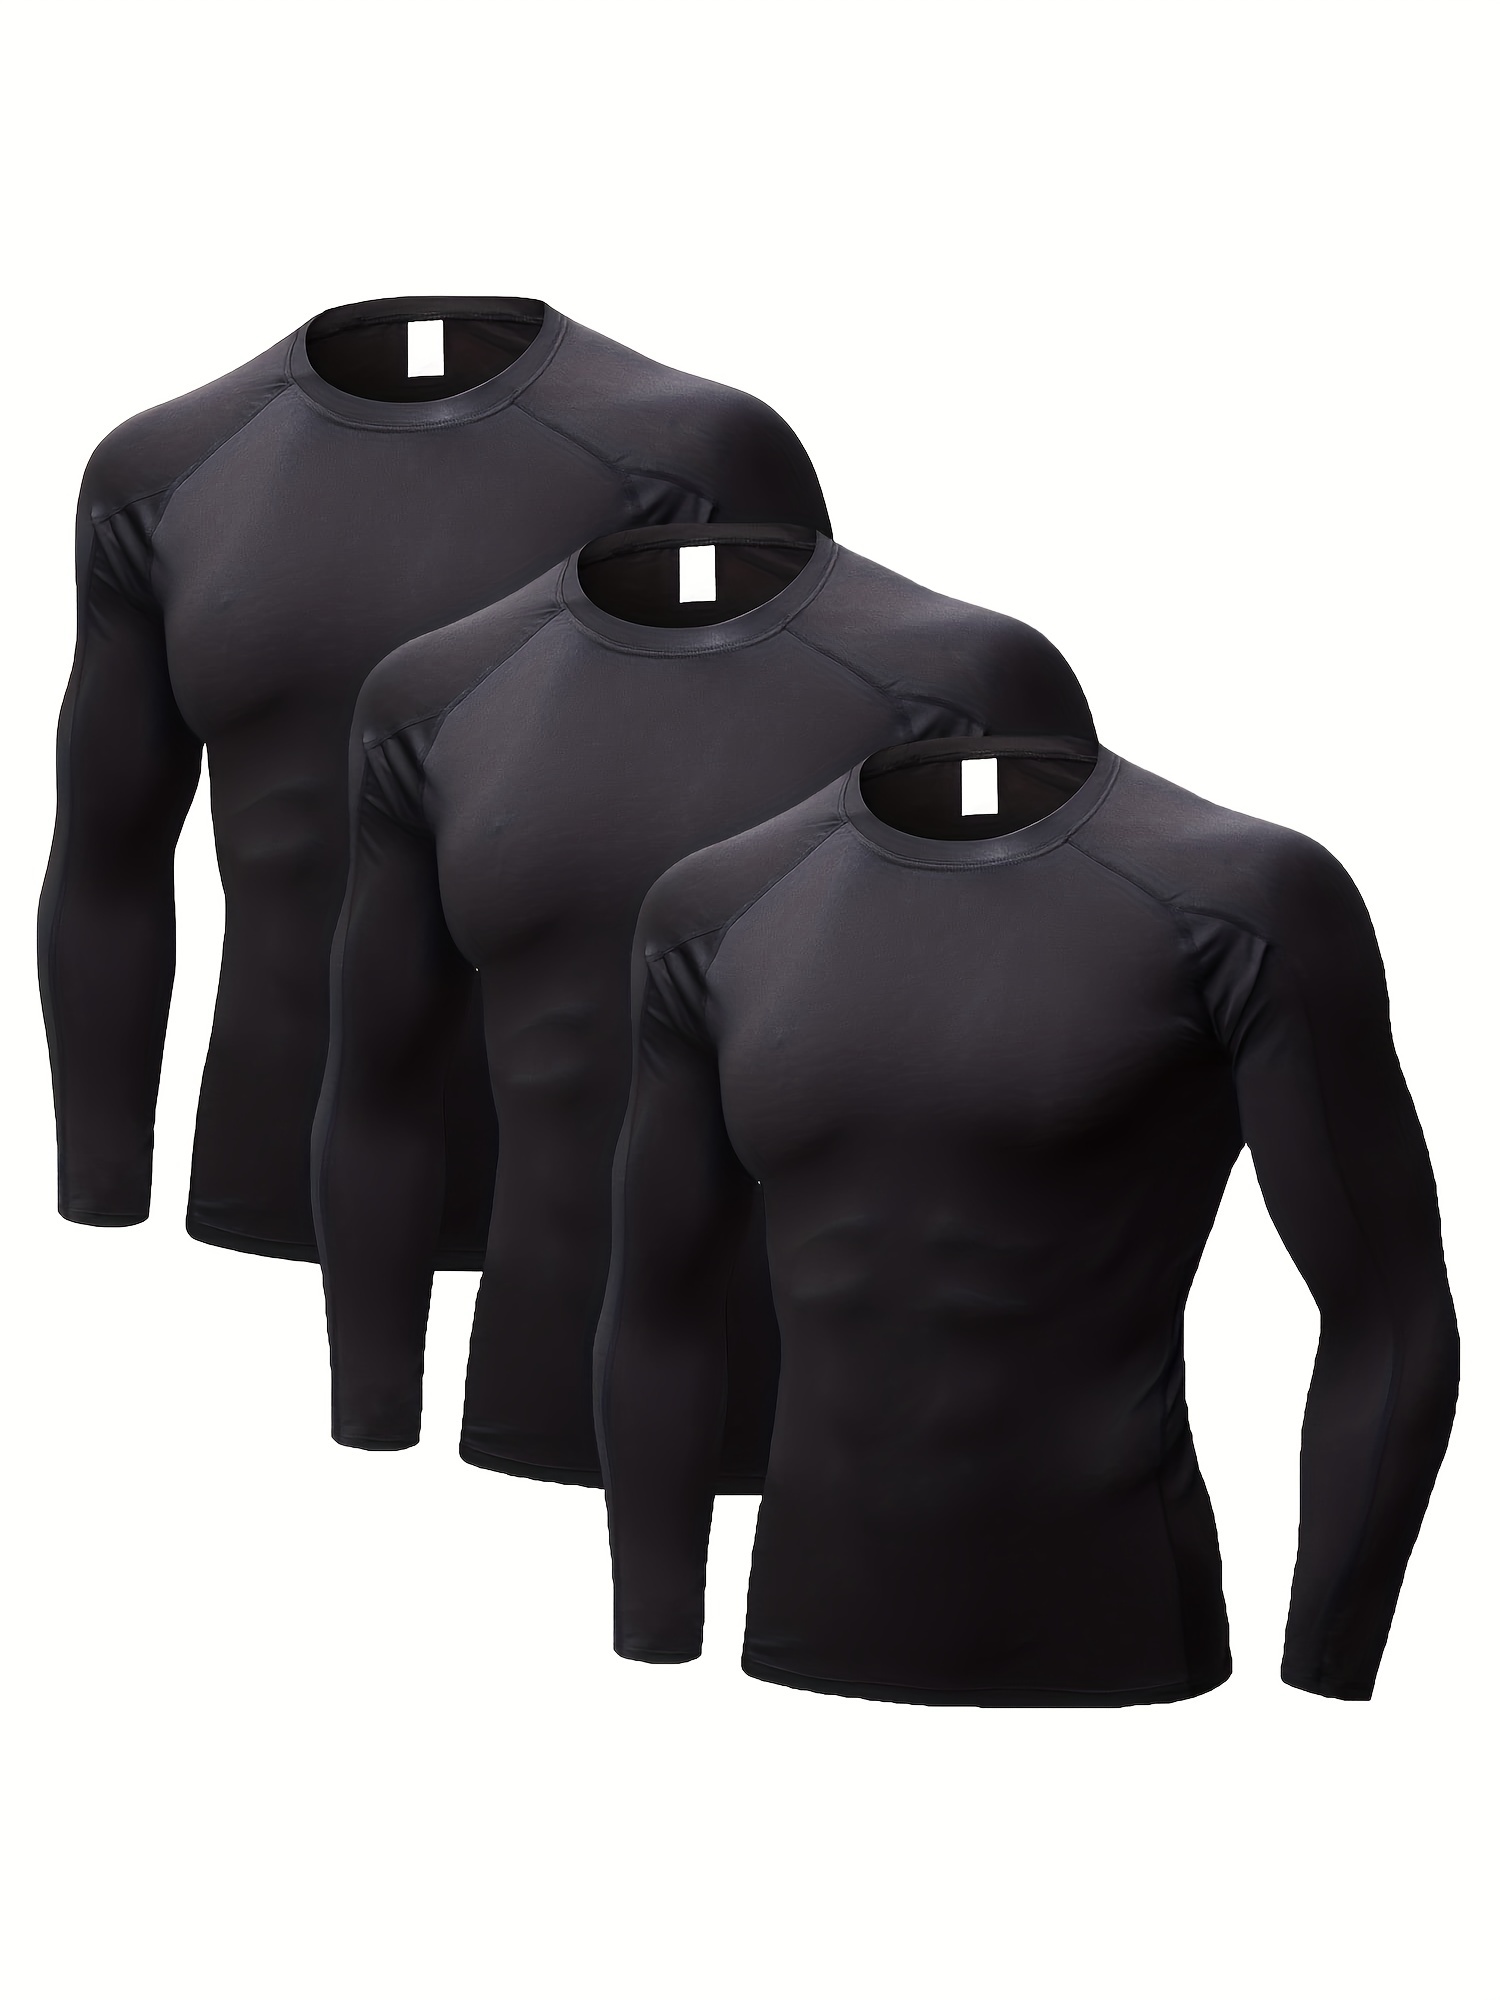 3pcs Men's Long Sleeve Plain Color Round Neck Compression Shirts For Sports  Outdoor Indoor Running Activities Gym Fit